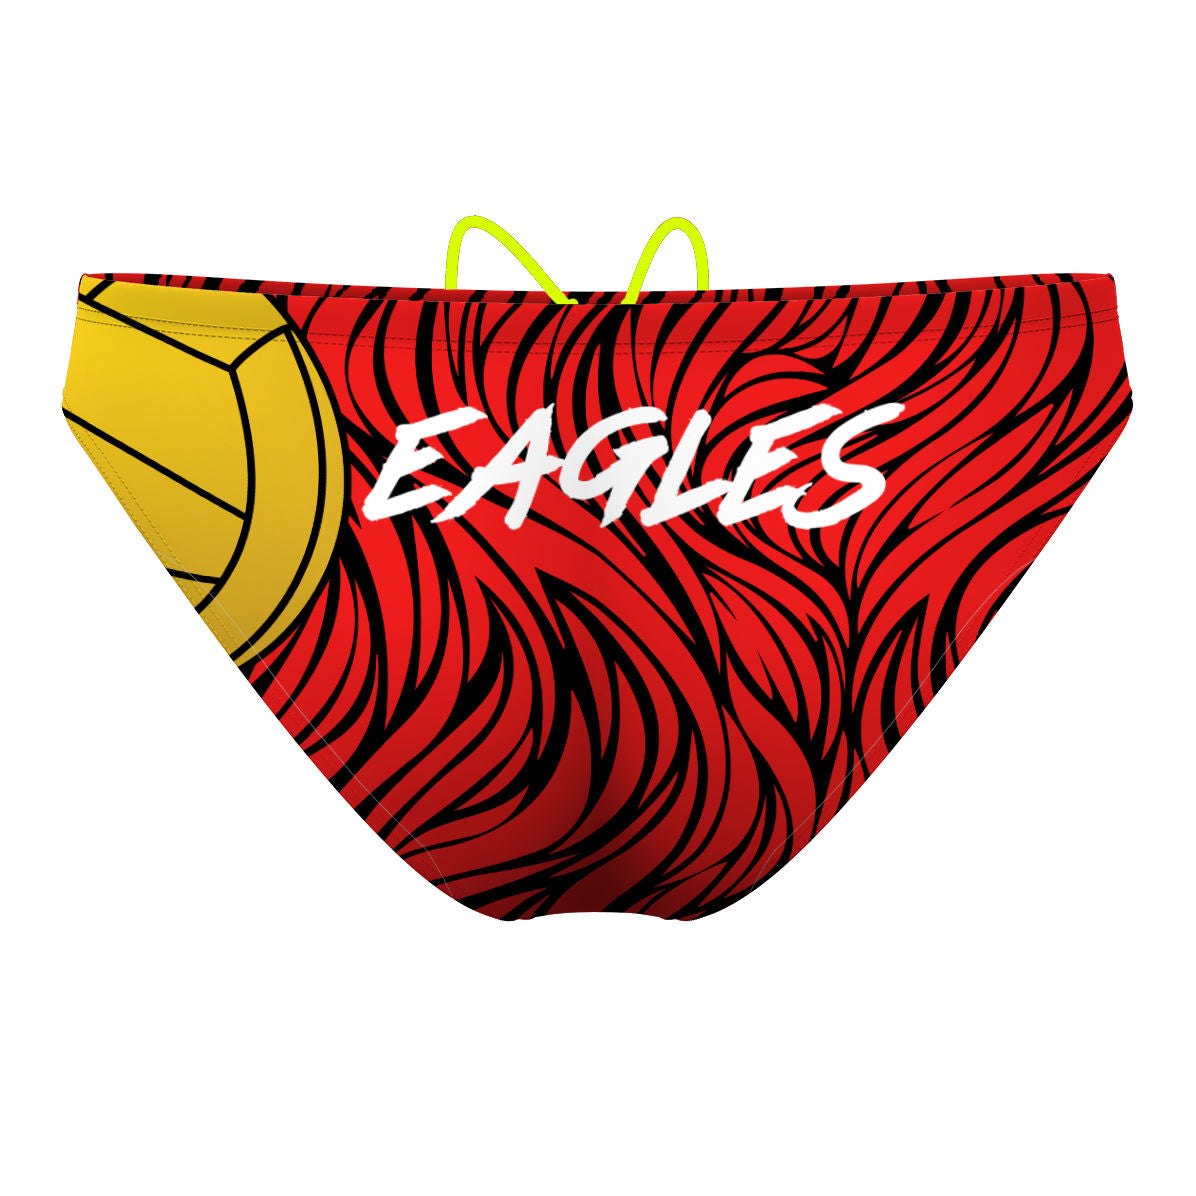 Edgewater Eagles HS - Waterpolo Brief